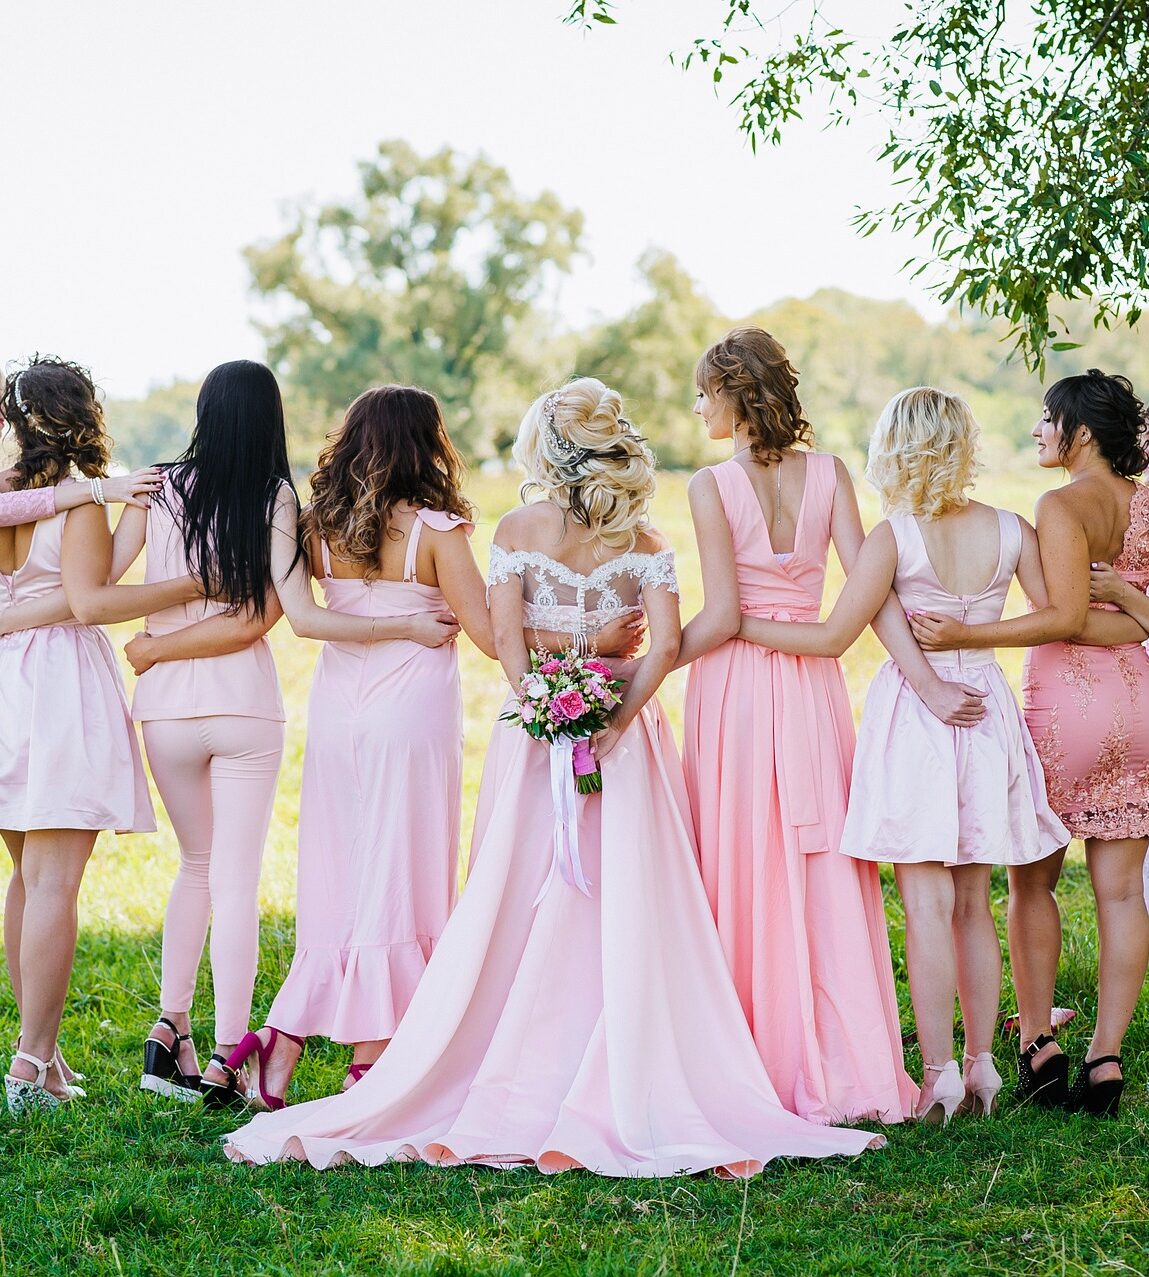 10 Delicious Gift Ideas for Your Bridal Party